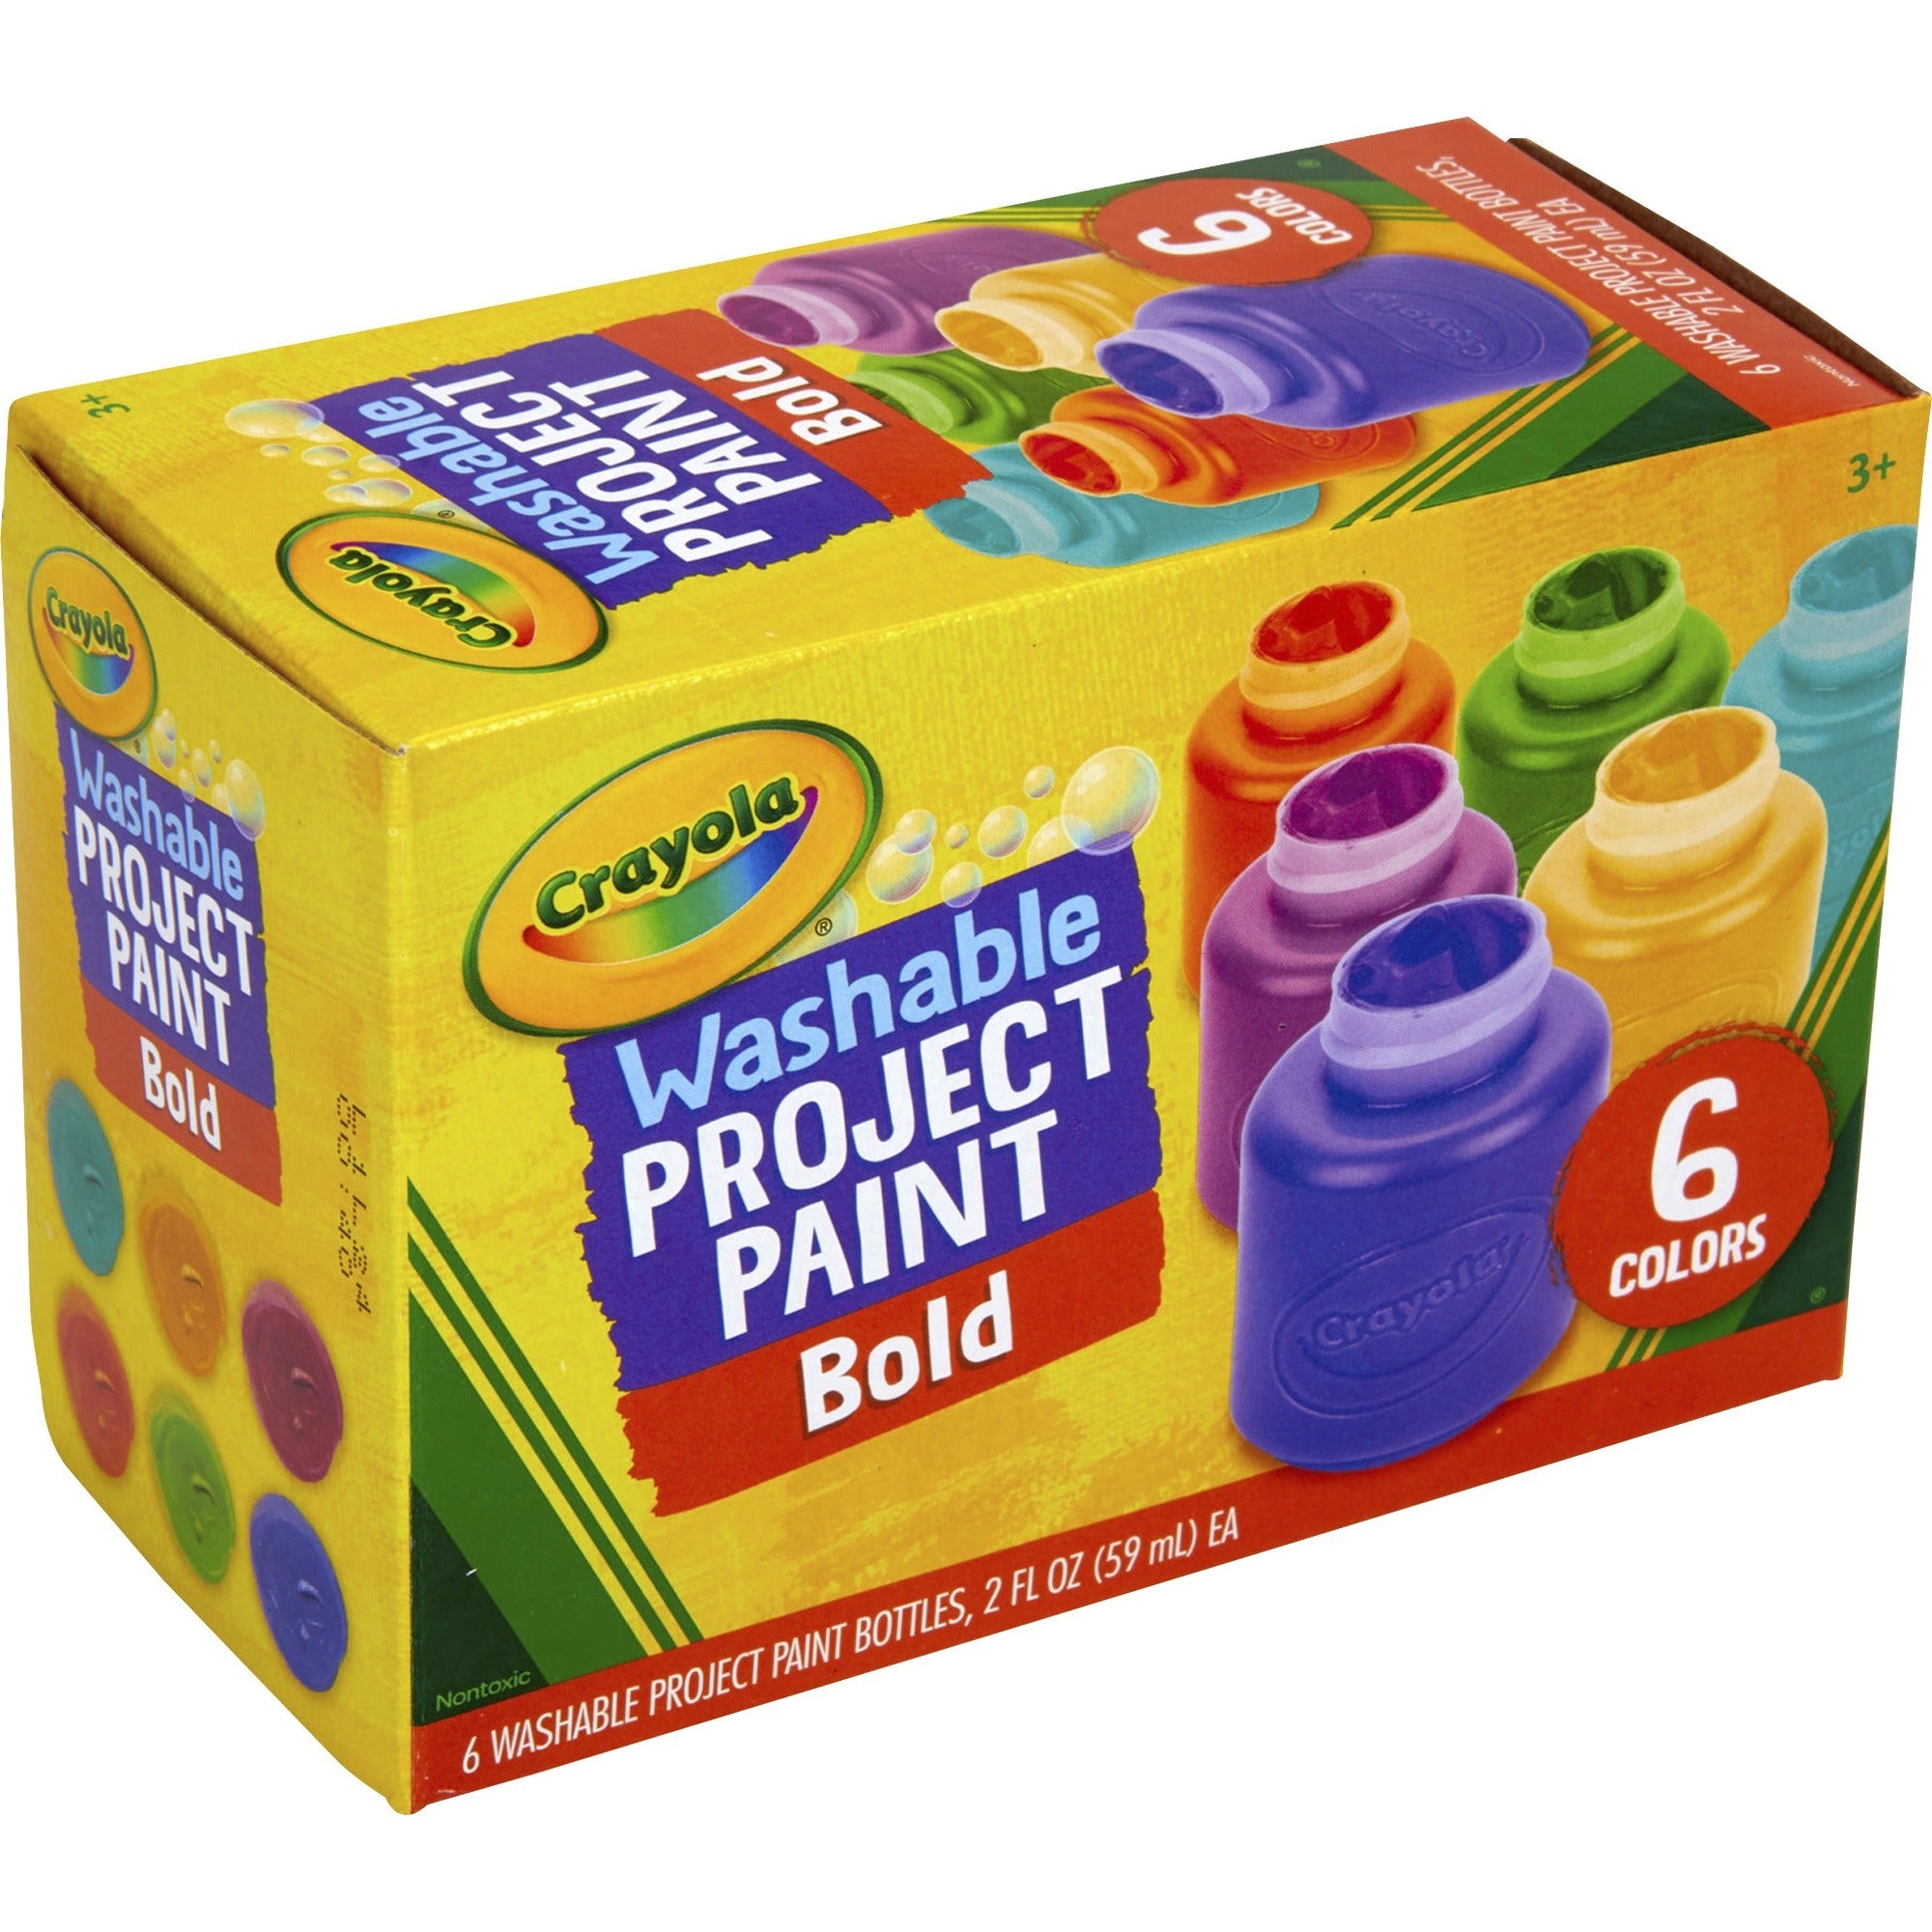 crayola-washable-project-paint-6-pack-yellow-green-yellow-orange-red-orange-fuchsia-blue-violet-teal_cyo542403 - 4